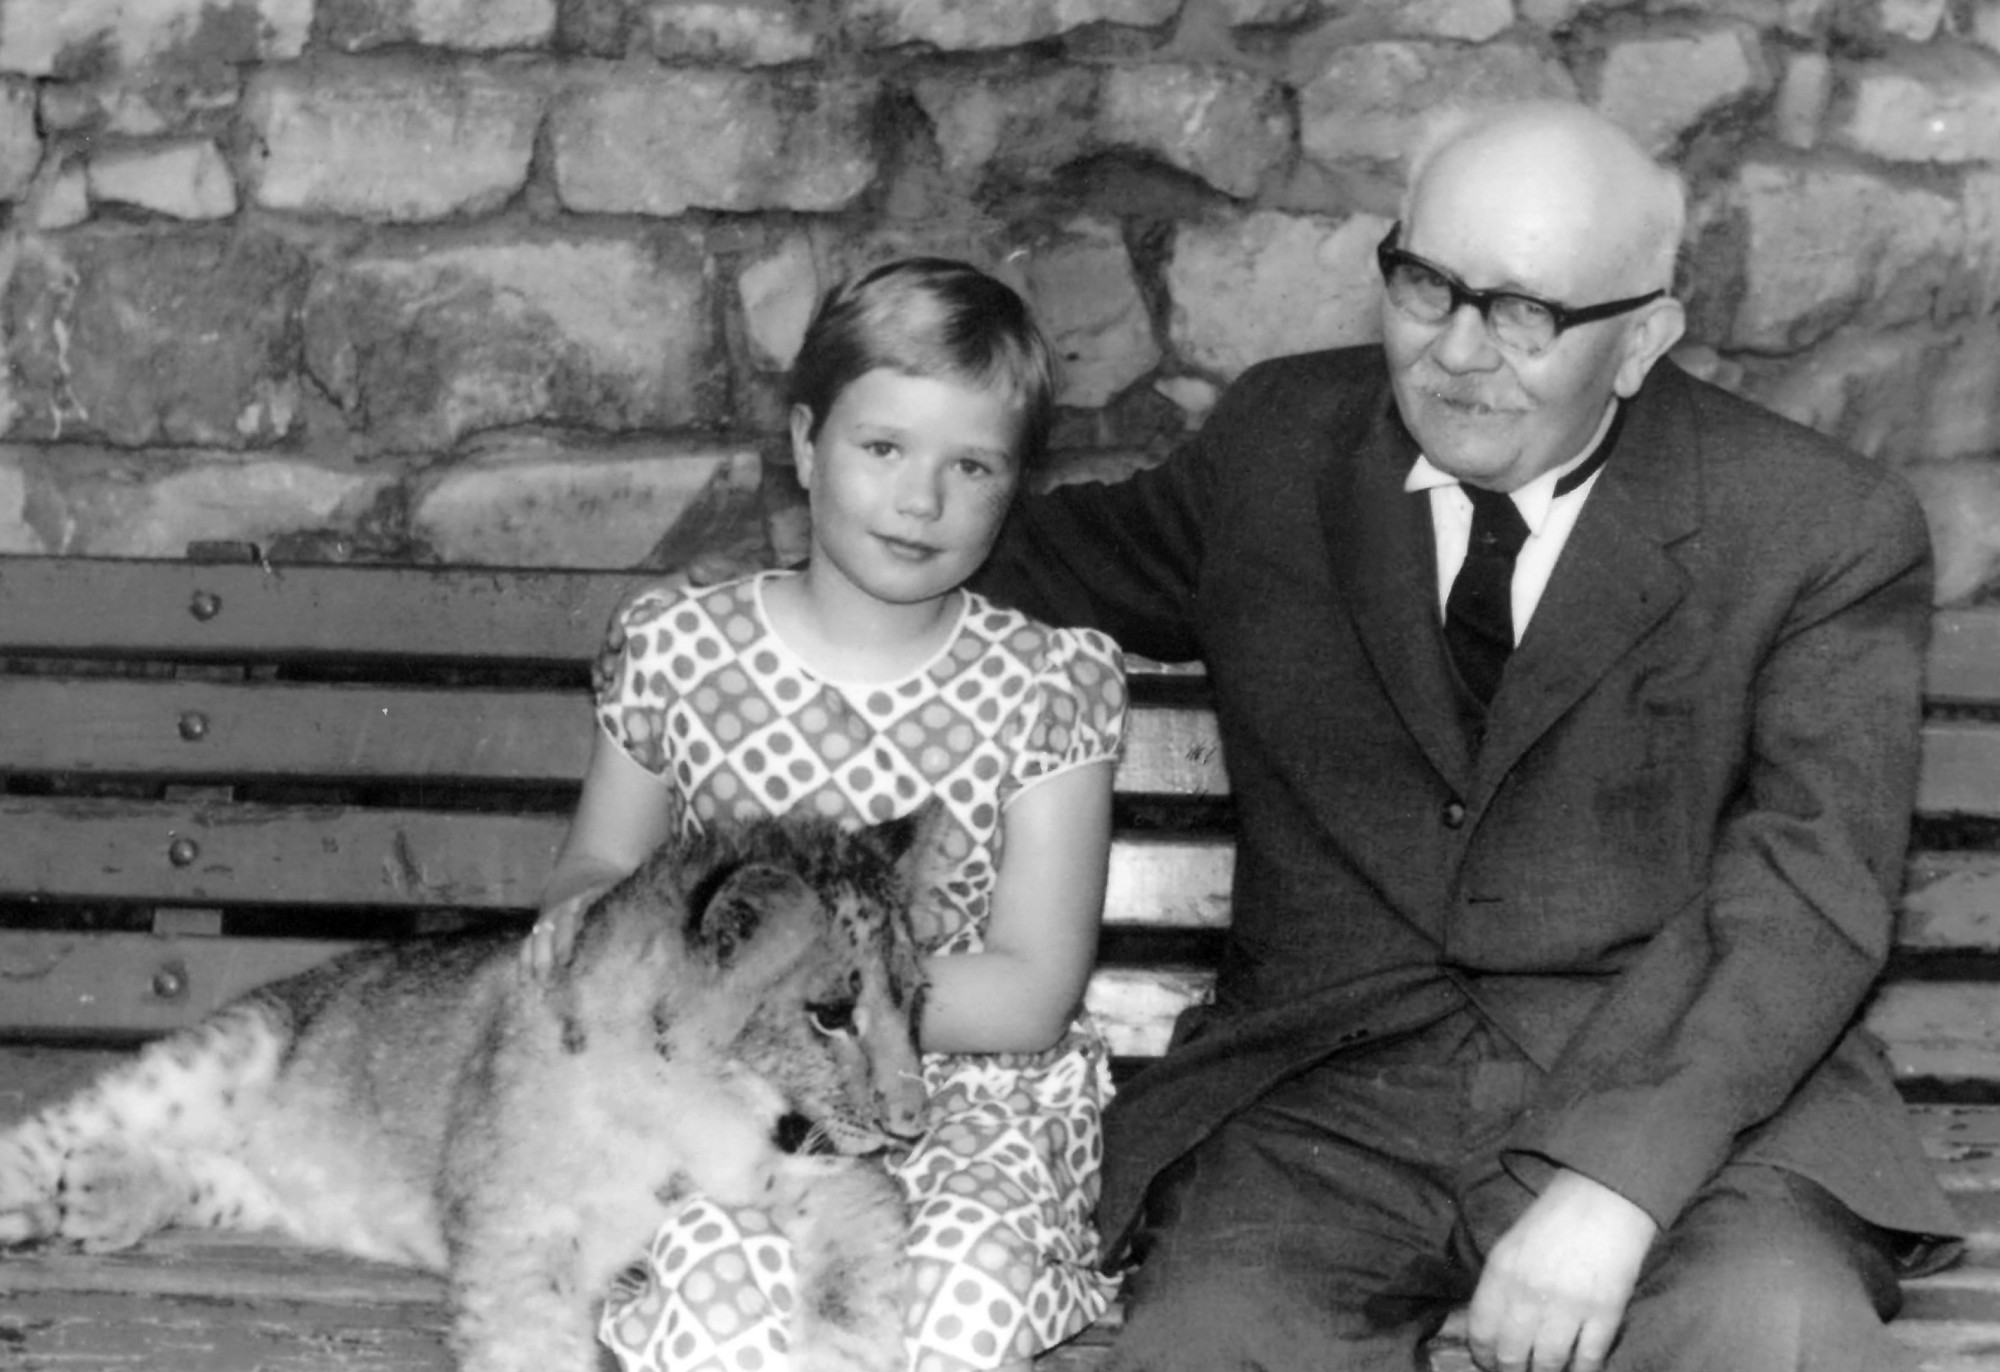 A young girl and an older man sit next to each other on a bench, looking at the camera. There is a lion cub sitting on the girl's lap.